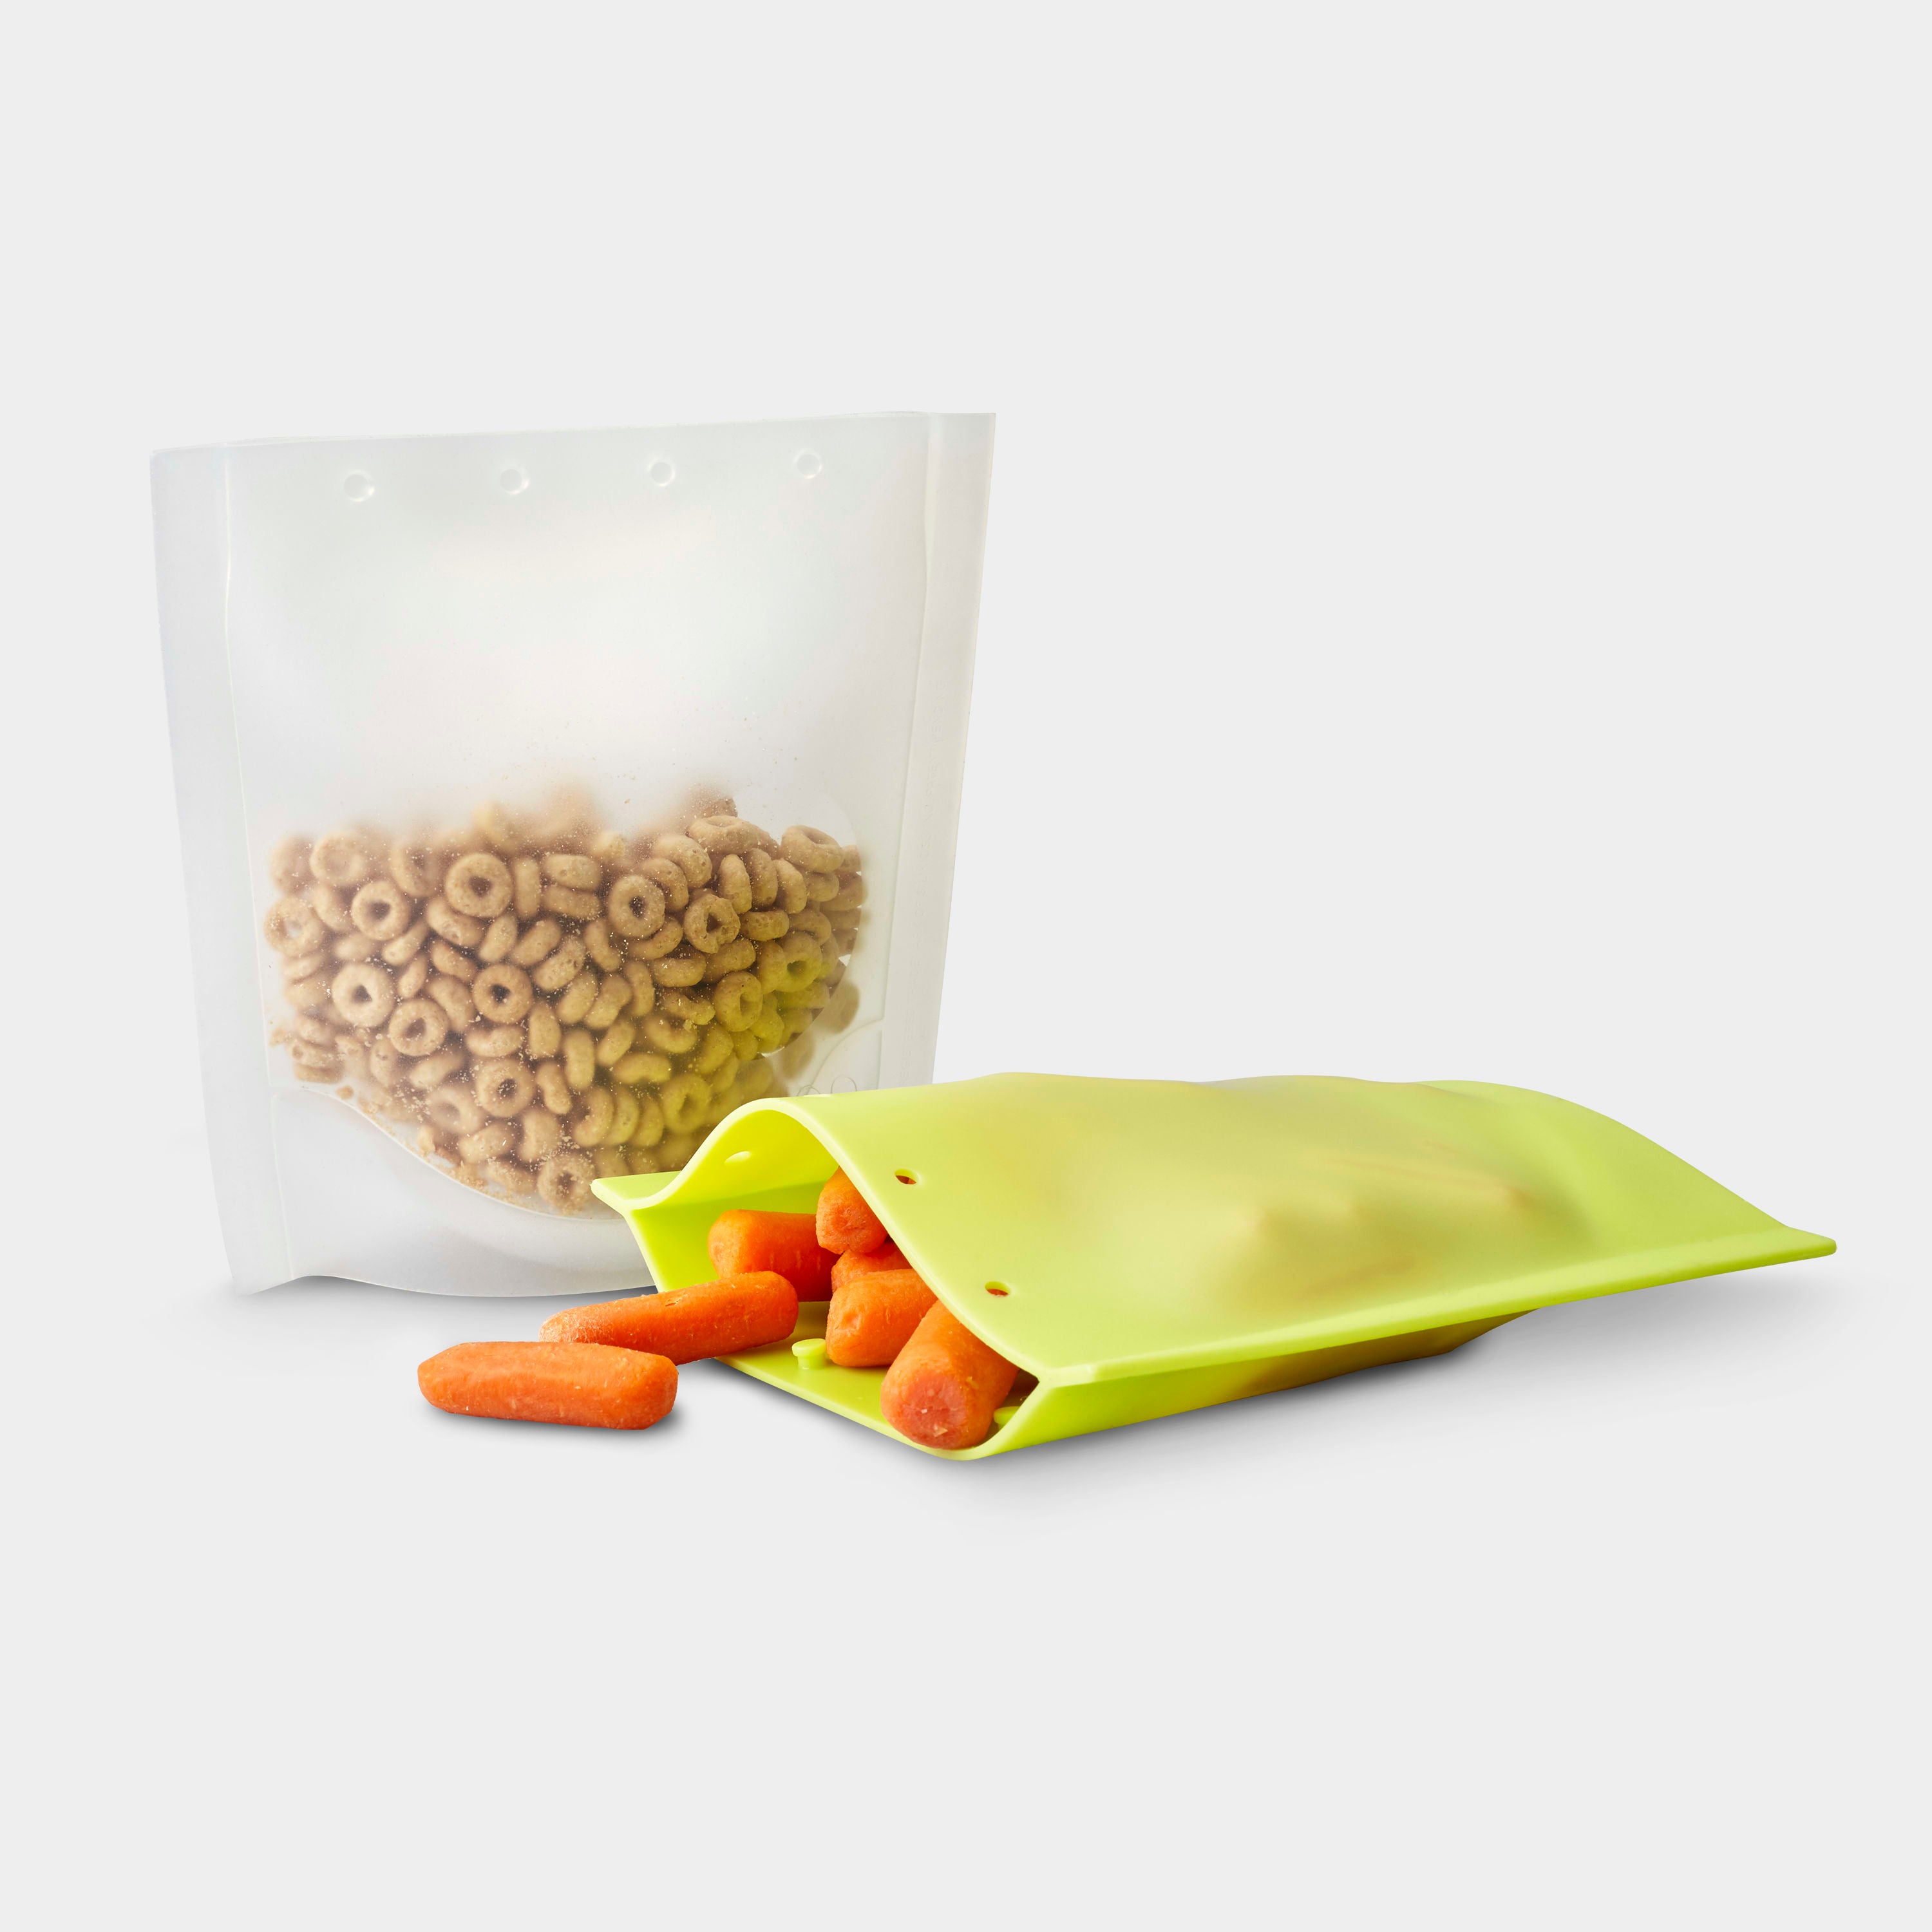 Zip Top Reusable 100% Silicone Food Storage Bags and Containers